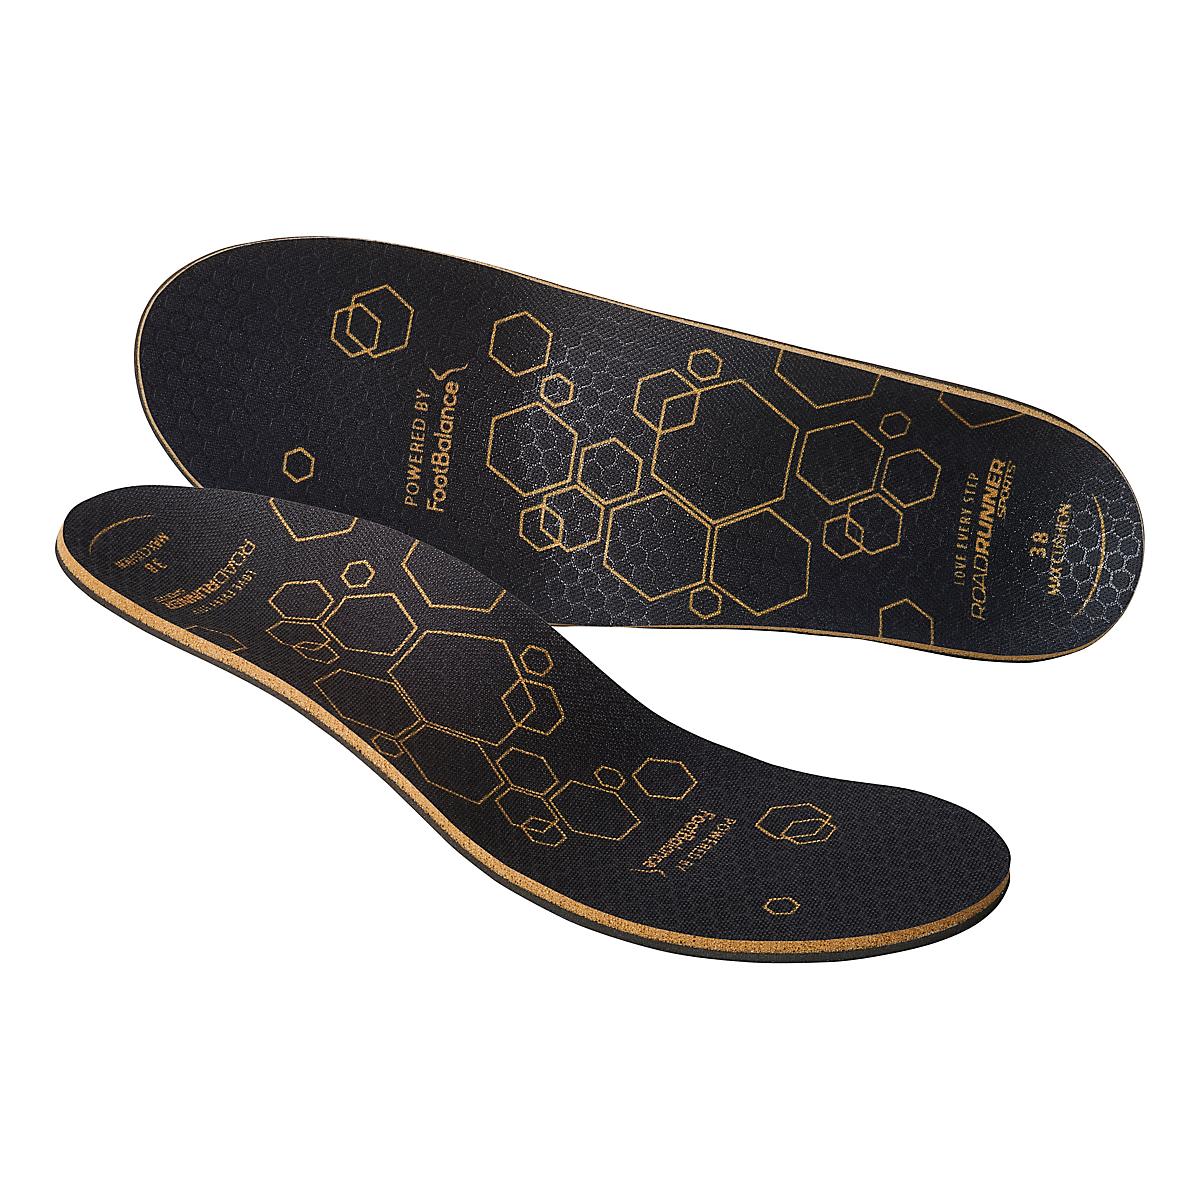 R Gear Custom Insole Insoles At Snaidero Usa - roblox nova hotels interviews promotions youtube